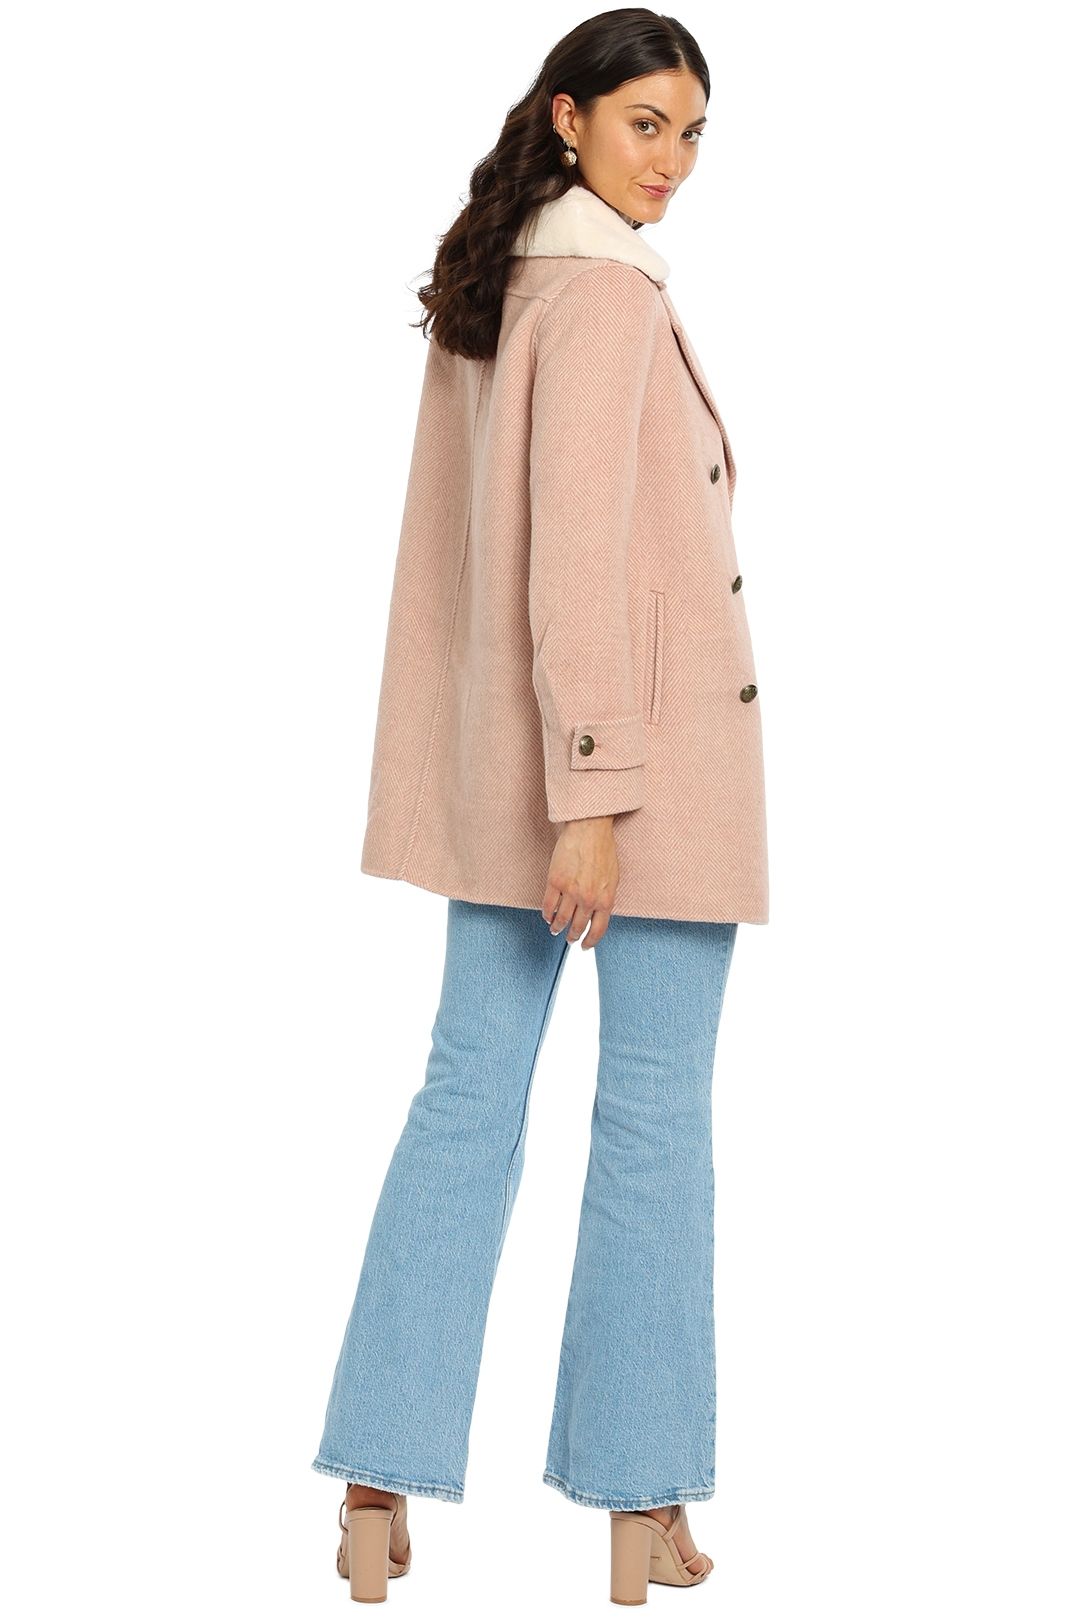 Belle and Bloom Liberty Sherpa Collar Coat Long Sleeve